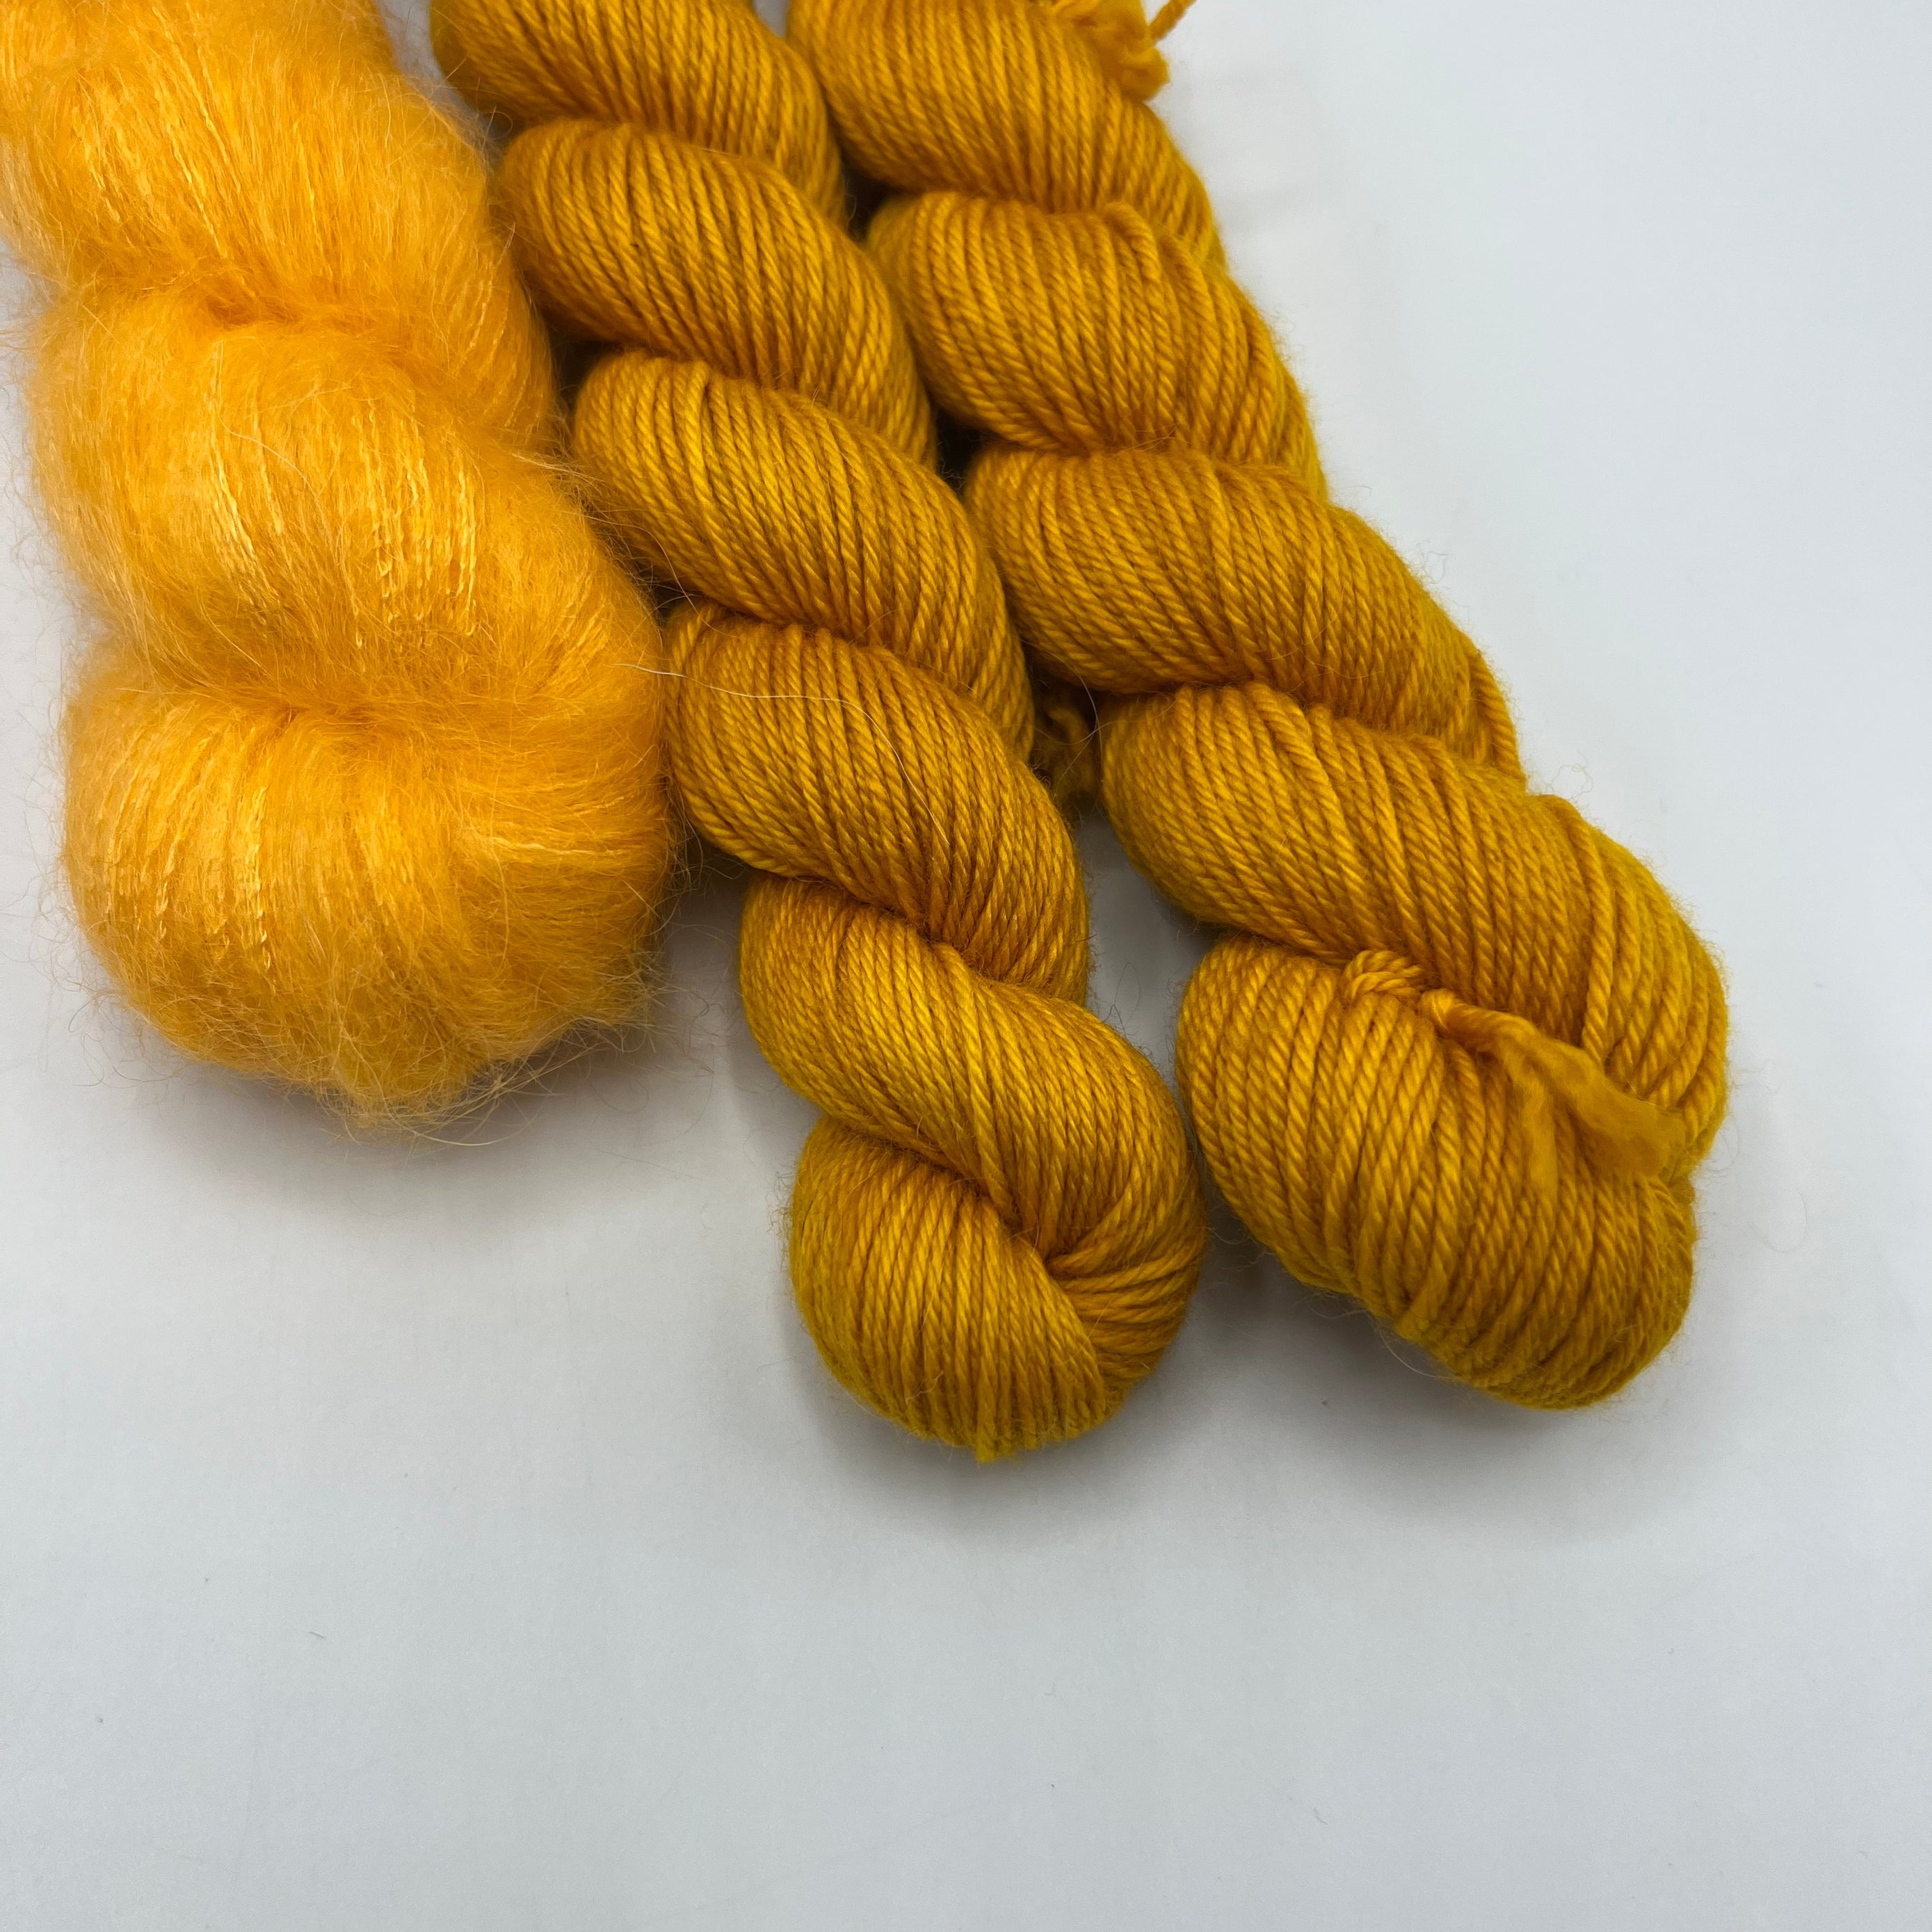 Yarn Ave 70% Mohair 30% Wool 50g/Skein Handpainted Yarns Colorful and Cheap  Yarns (21 Light Wine)